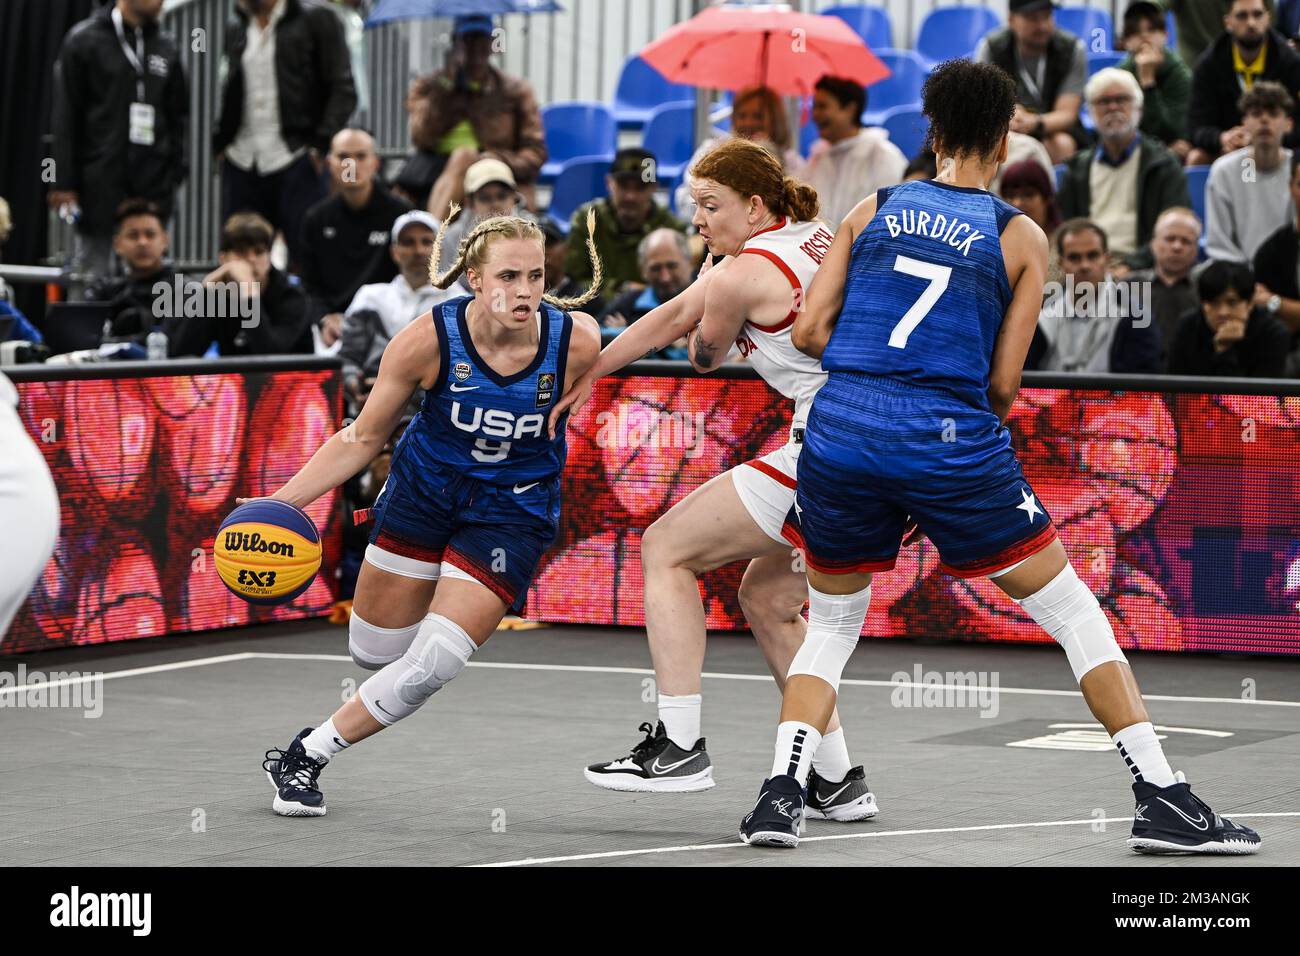 US' Hailey Van Lith and Canada's Kacie Bosch pictured in action during a 3x3 basketball game between Canada and the United States of America, in the Women's quarter final round at the FIBA 2022 world cup, Saturday 25 June 2022, in Antwerp. The FIBA 3x3 Basket World Cup 2022 takes place from 21 to 26 June in Antwerp. BELGA PHOTO TOM GOYVAERTS Stock Photo